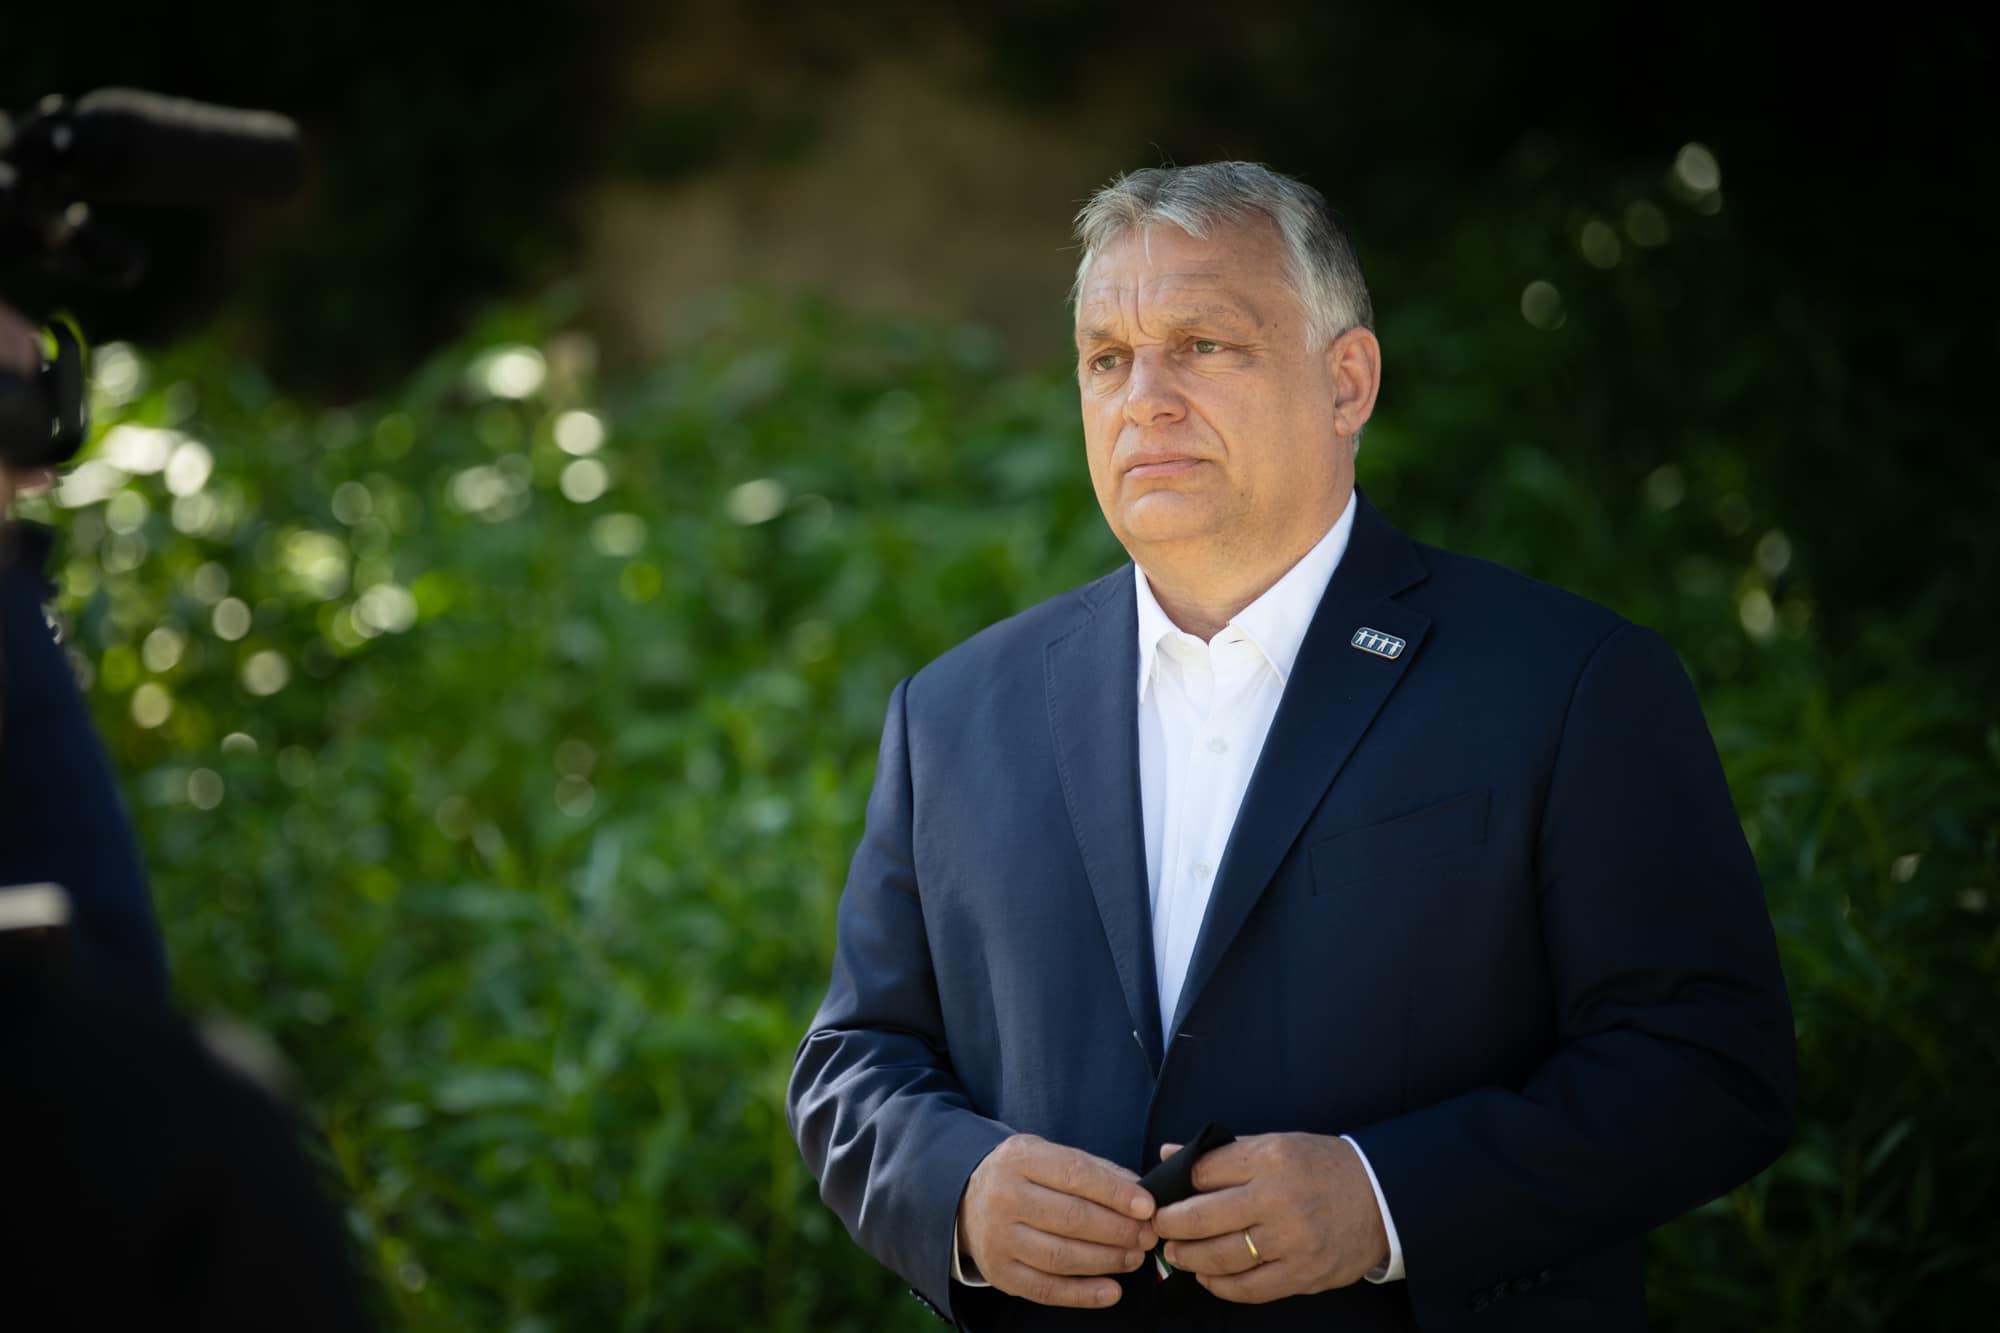 Orbán at EU Summit: Vaccine Procurement Must be Accelerated Without Ideological Considerations